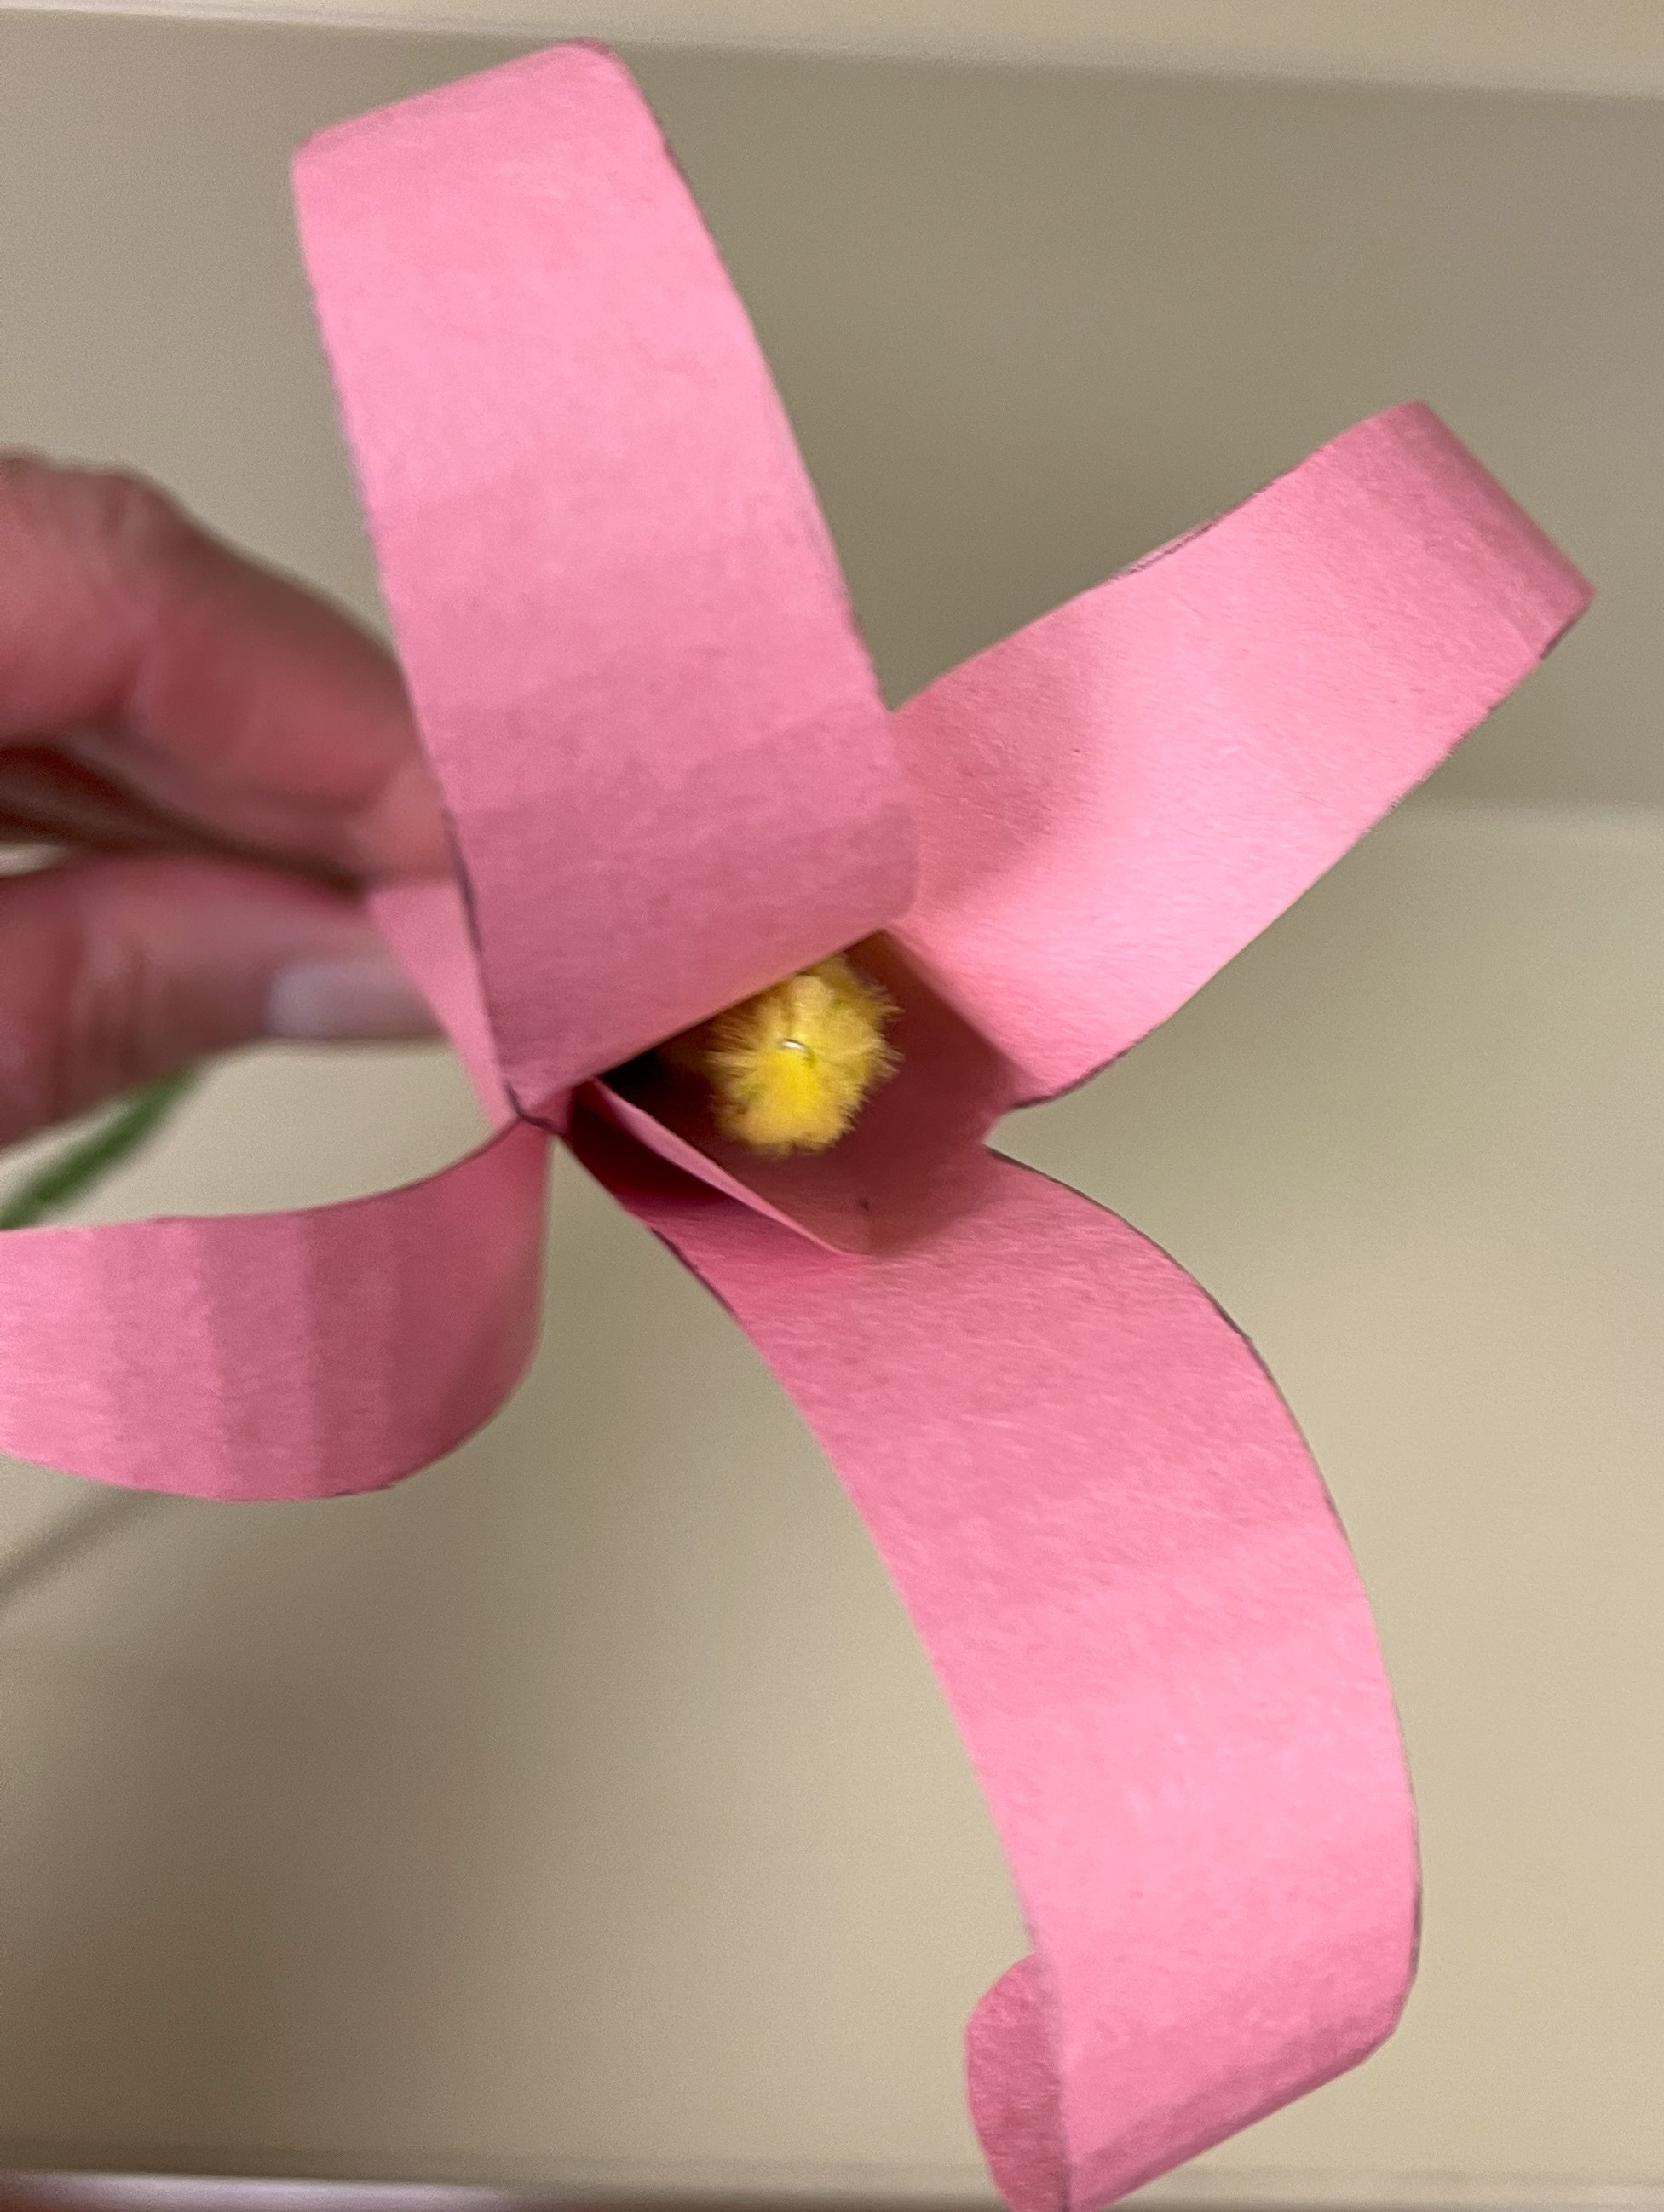 Construction paper & pipe cleaner flower